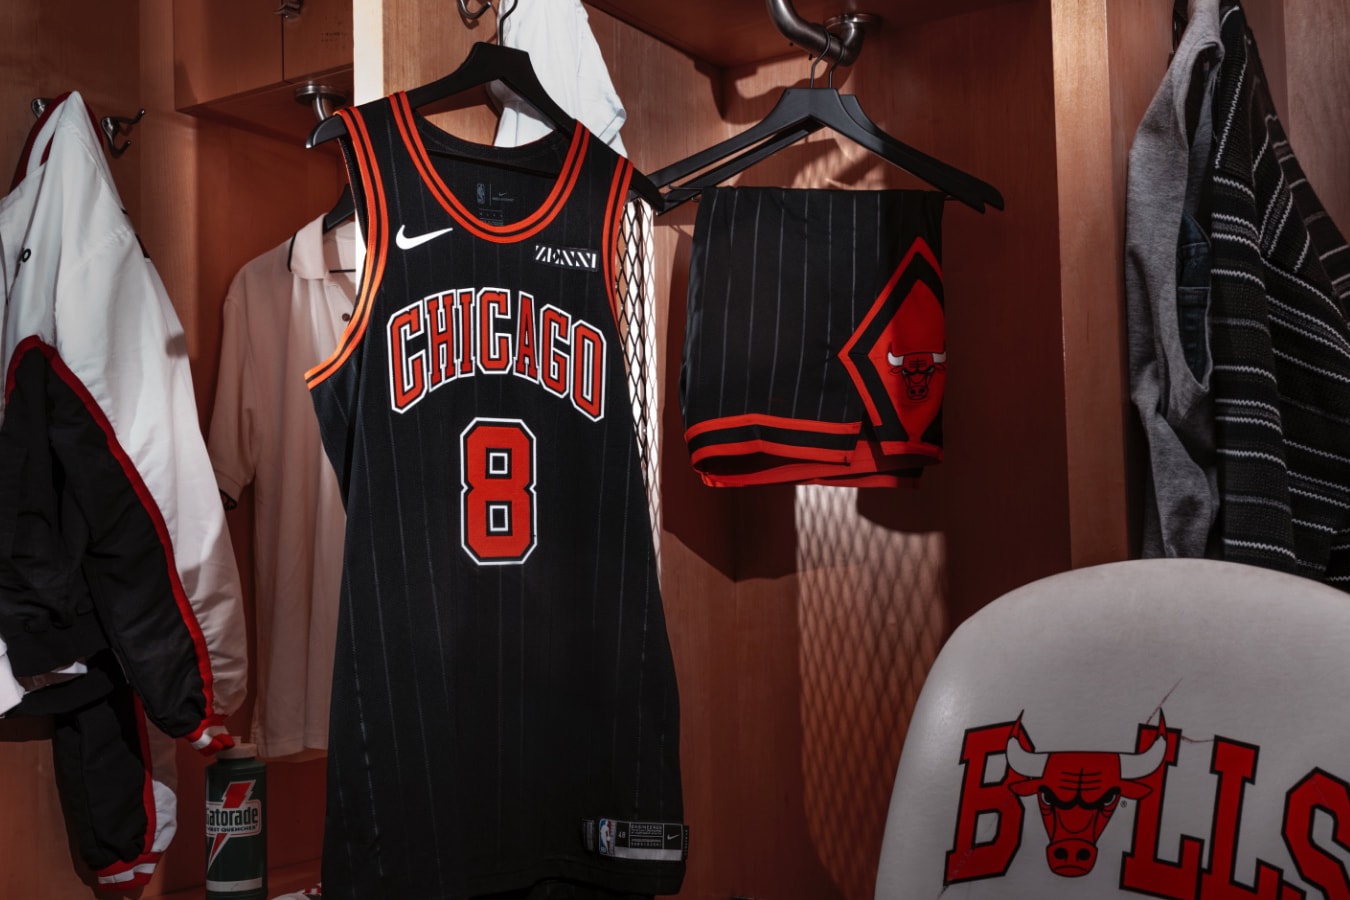 When You Can Buy the New Bulls Pinstripe Jerseys